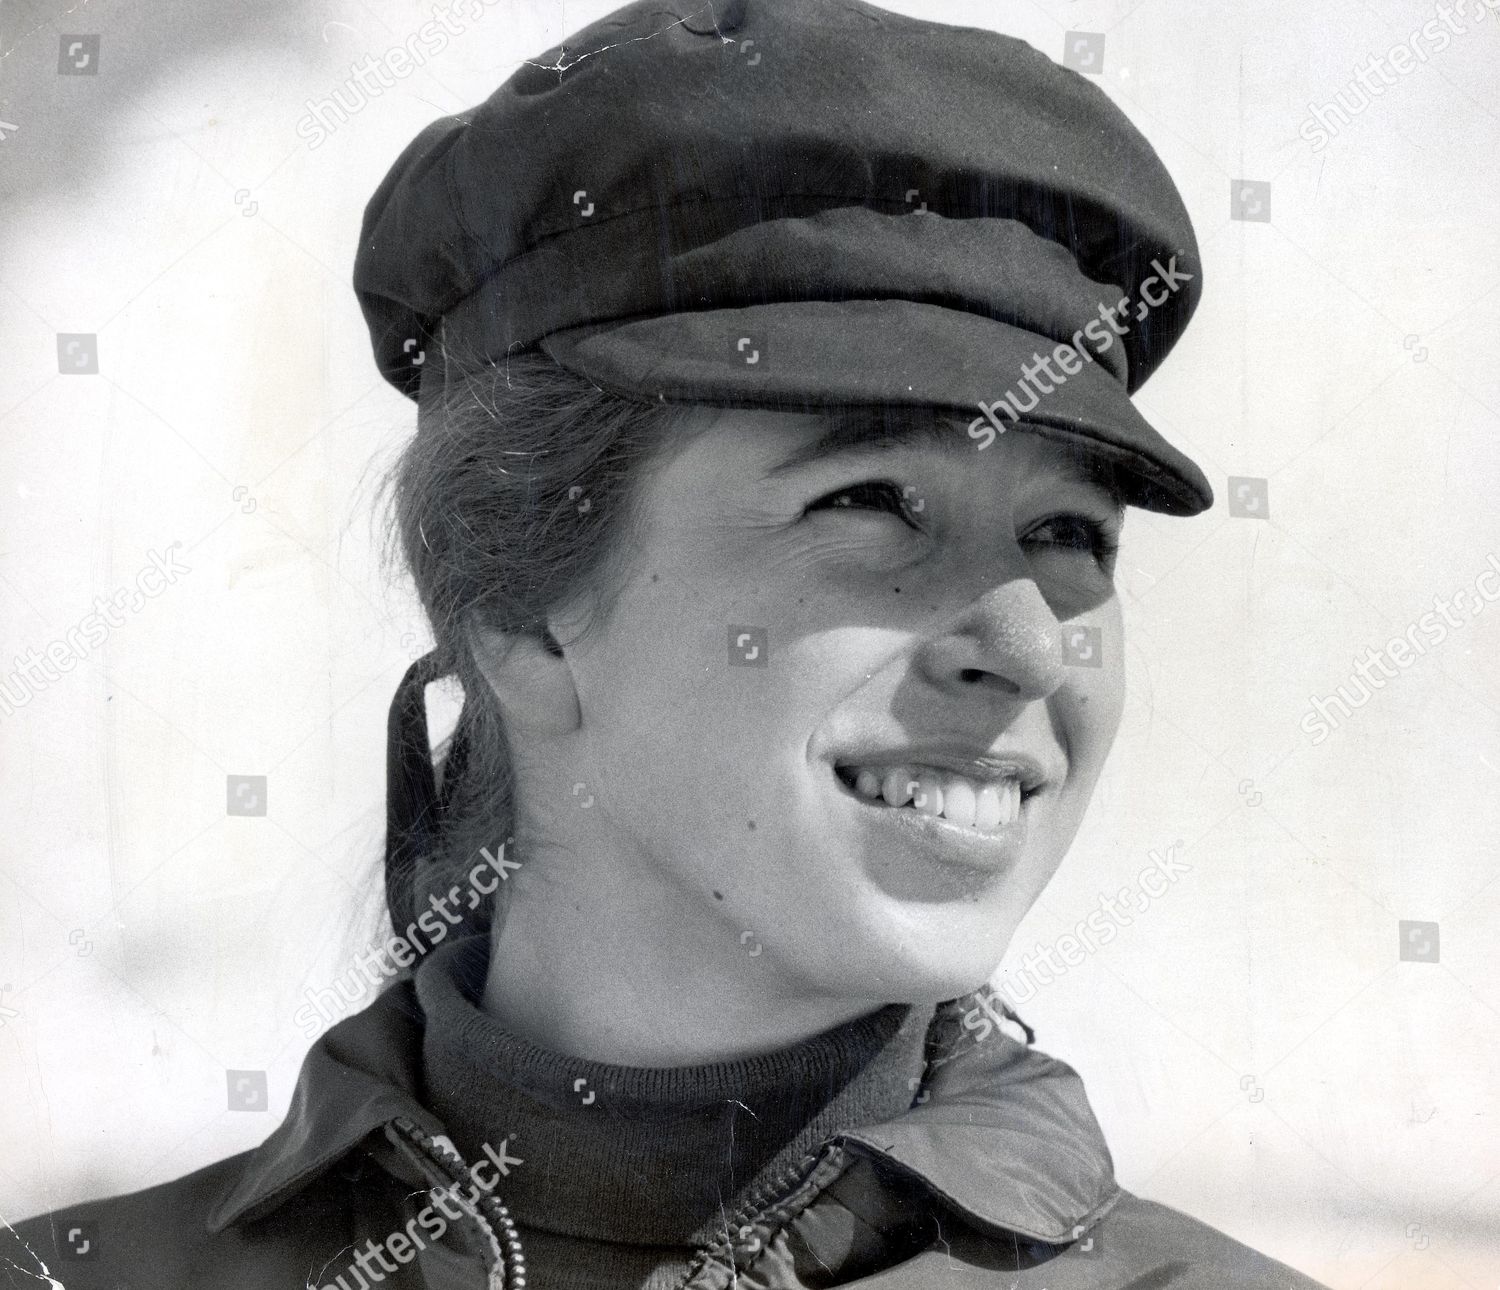 princess-anne-now-princess-royal-winter-sports-picture-shows-princess-anne-preparing-for-a-ski-run-at-the-french-winter-sports-centre-of-val-disere-where-she-is-on-holiday-1969-shutterstock-editorial-895531a.jpg